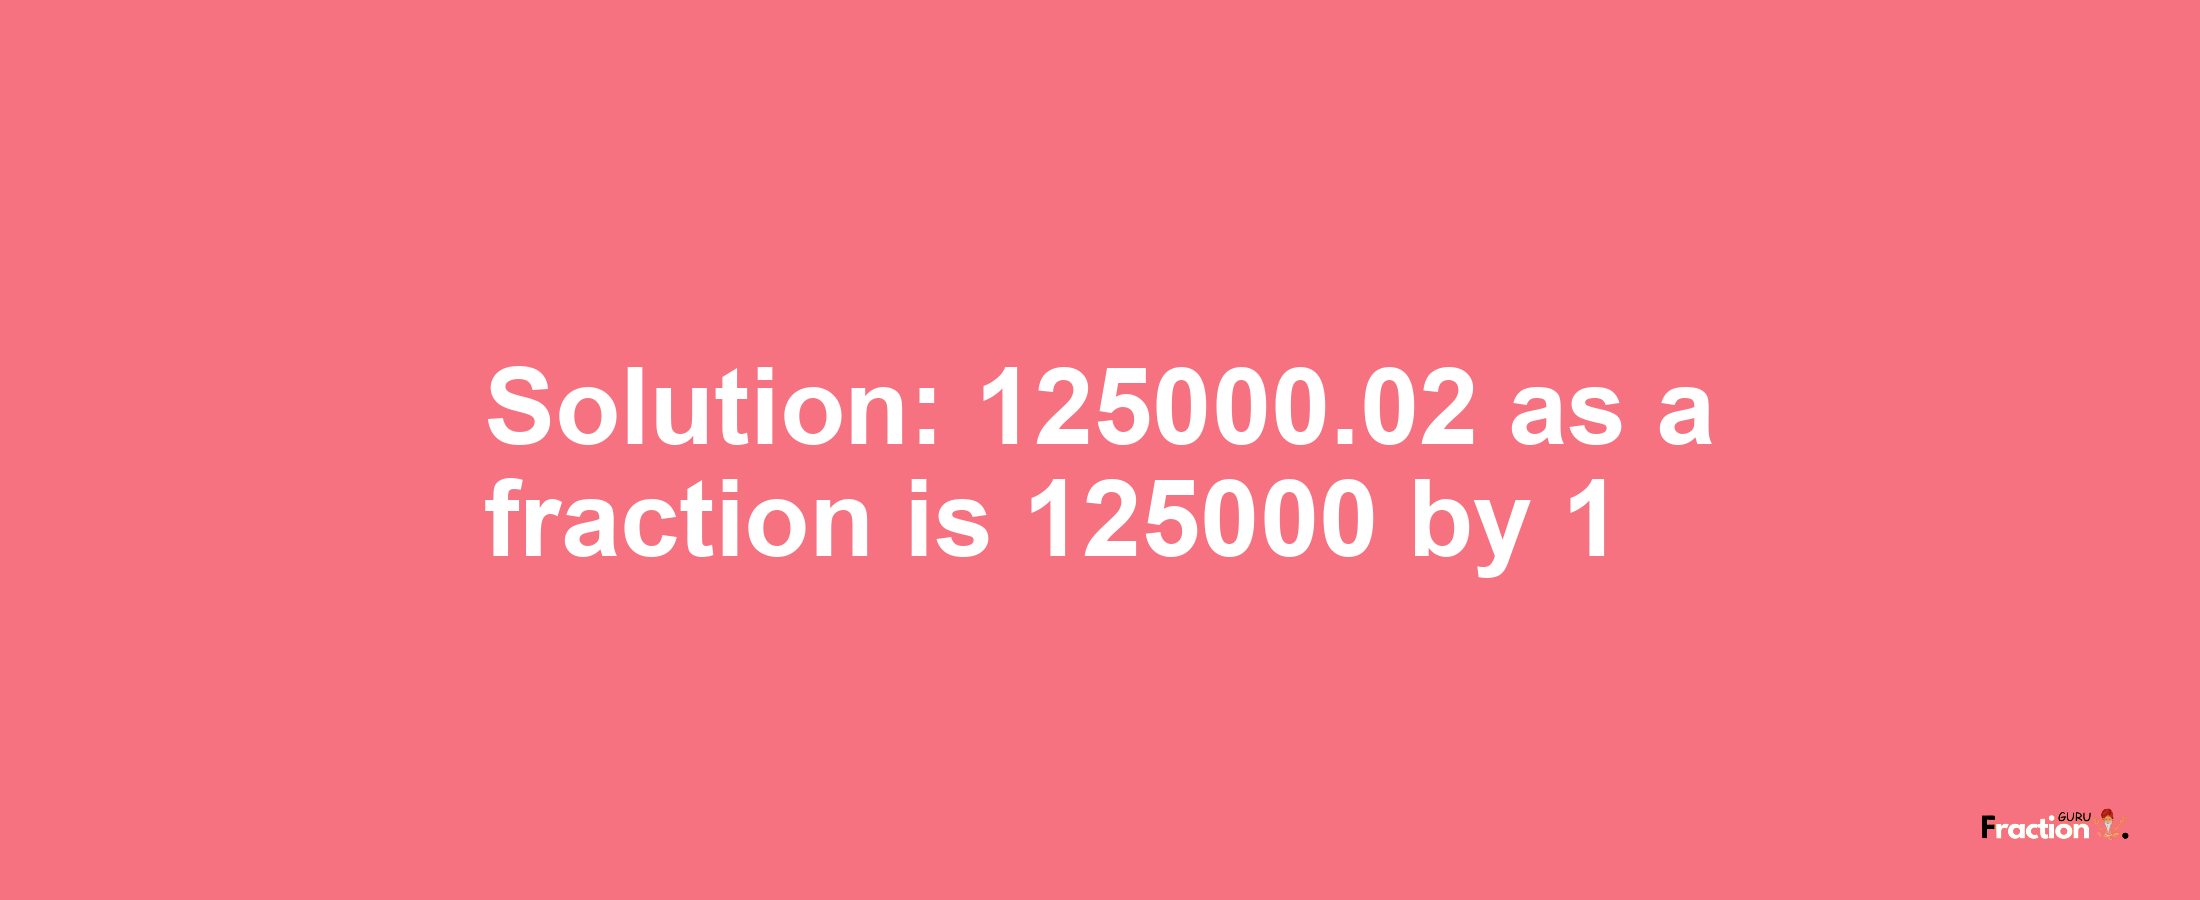 Solution:125000.02 as a fraction is 125000/1